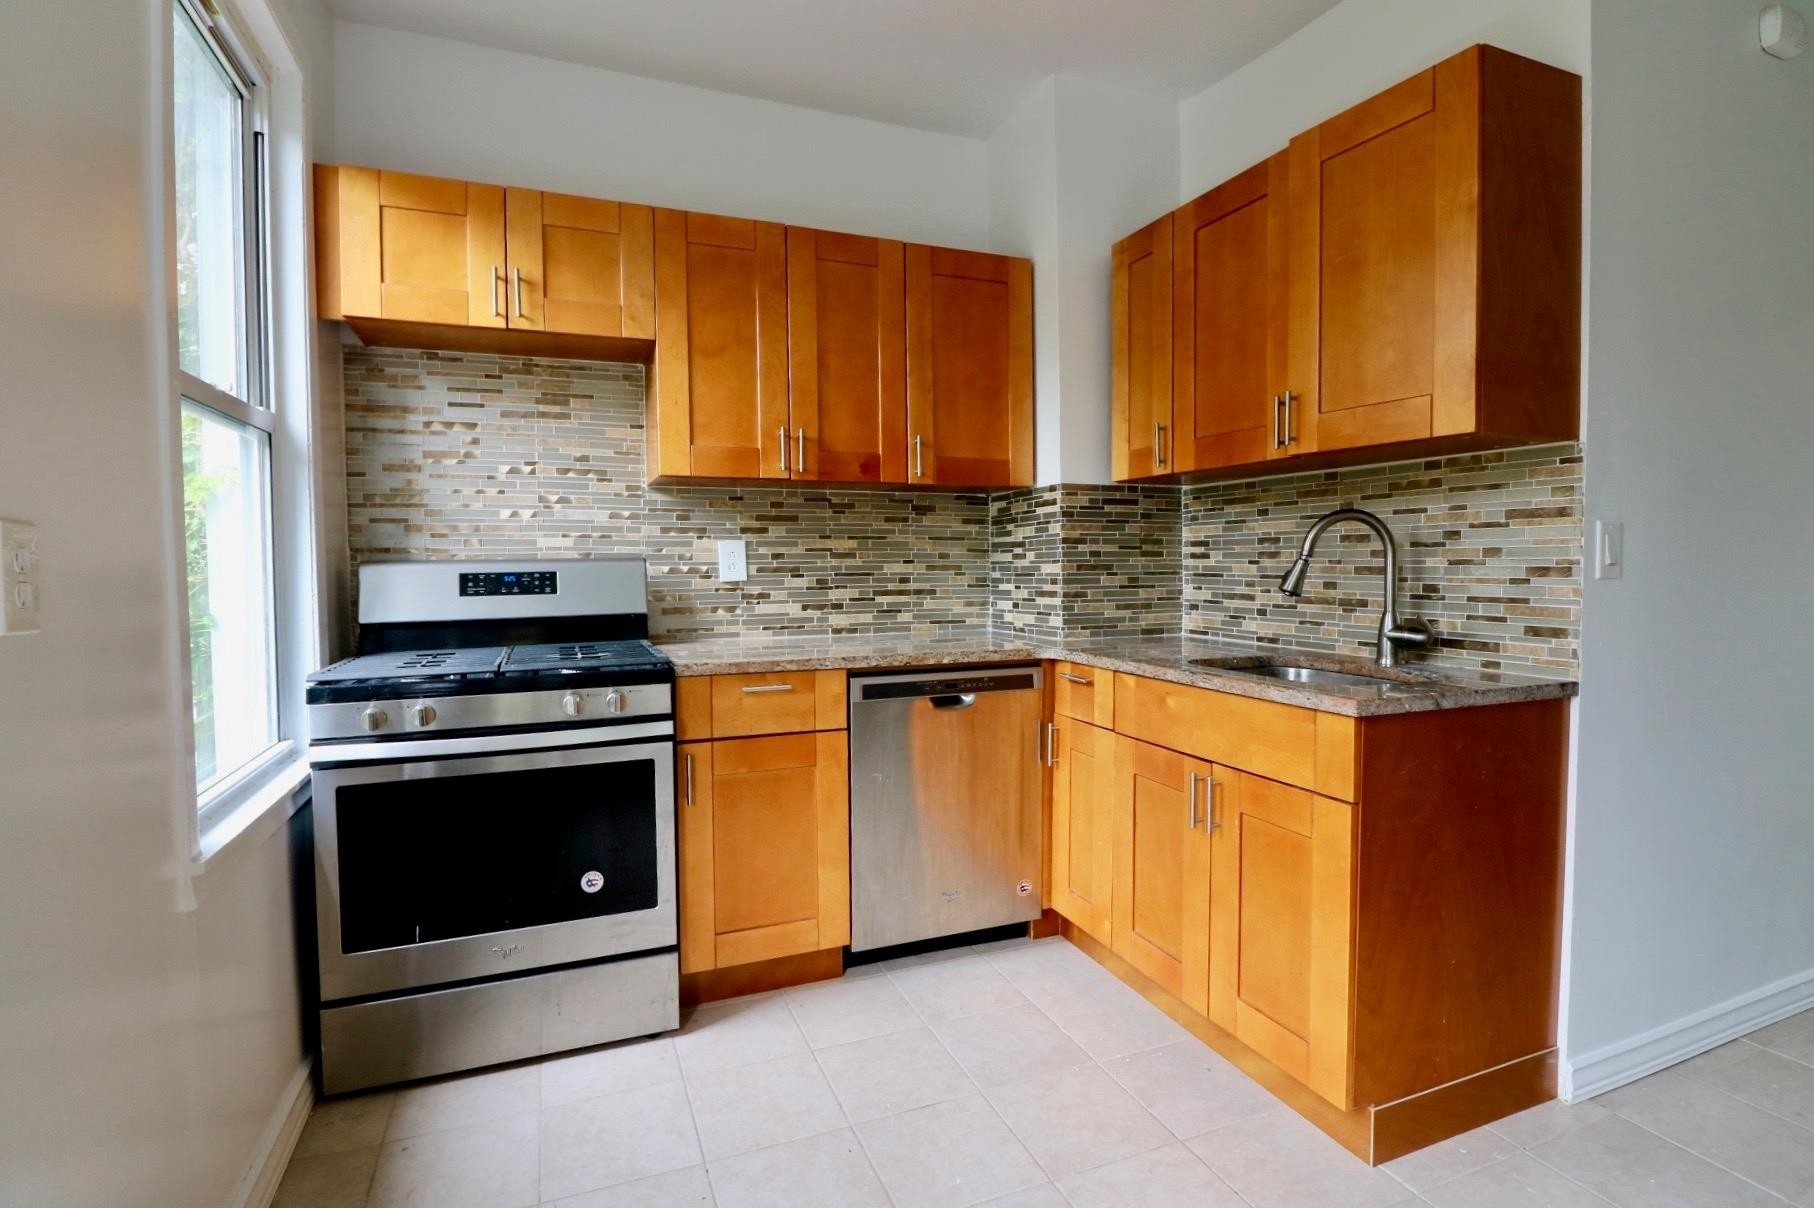 Property at 11-12 47th Avenue, 3R Queens